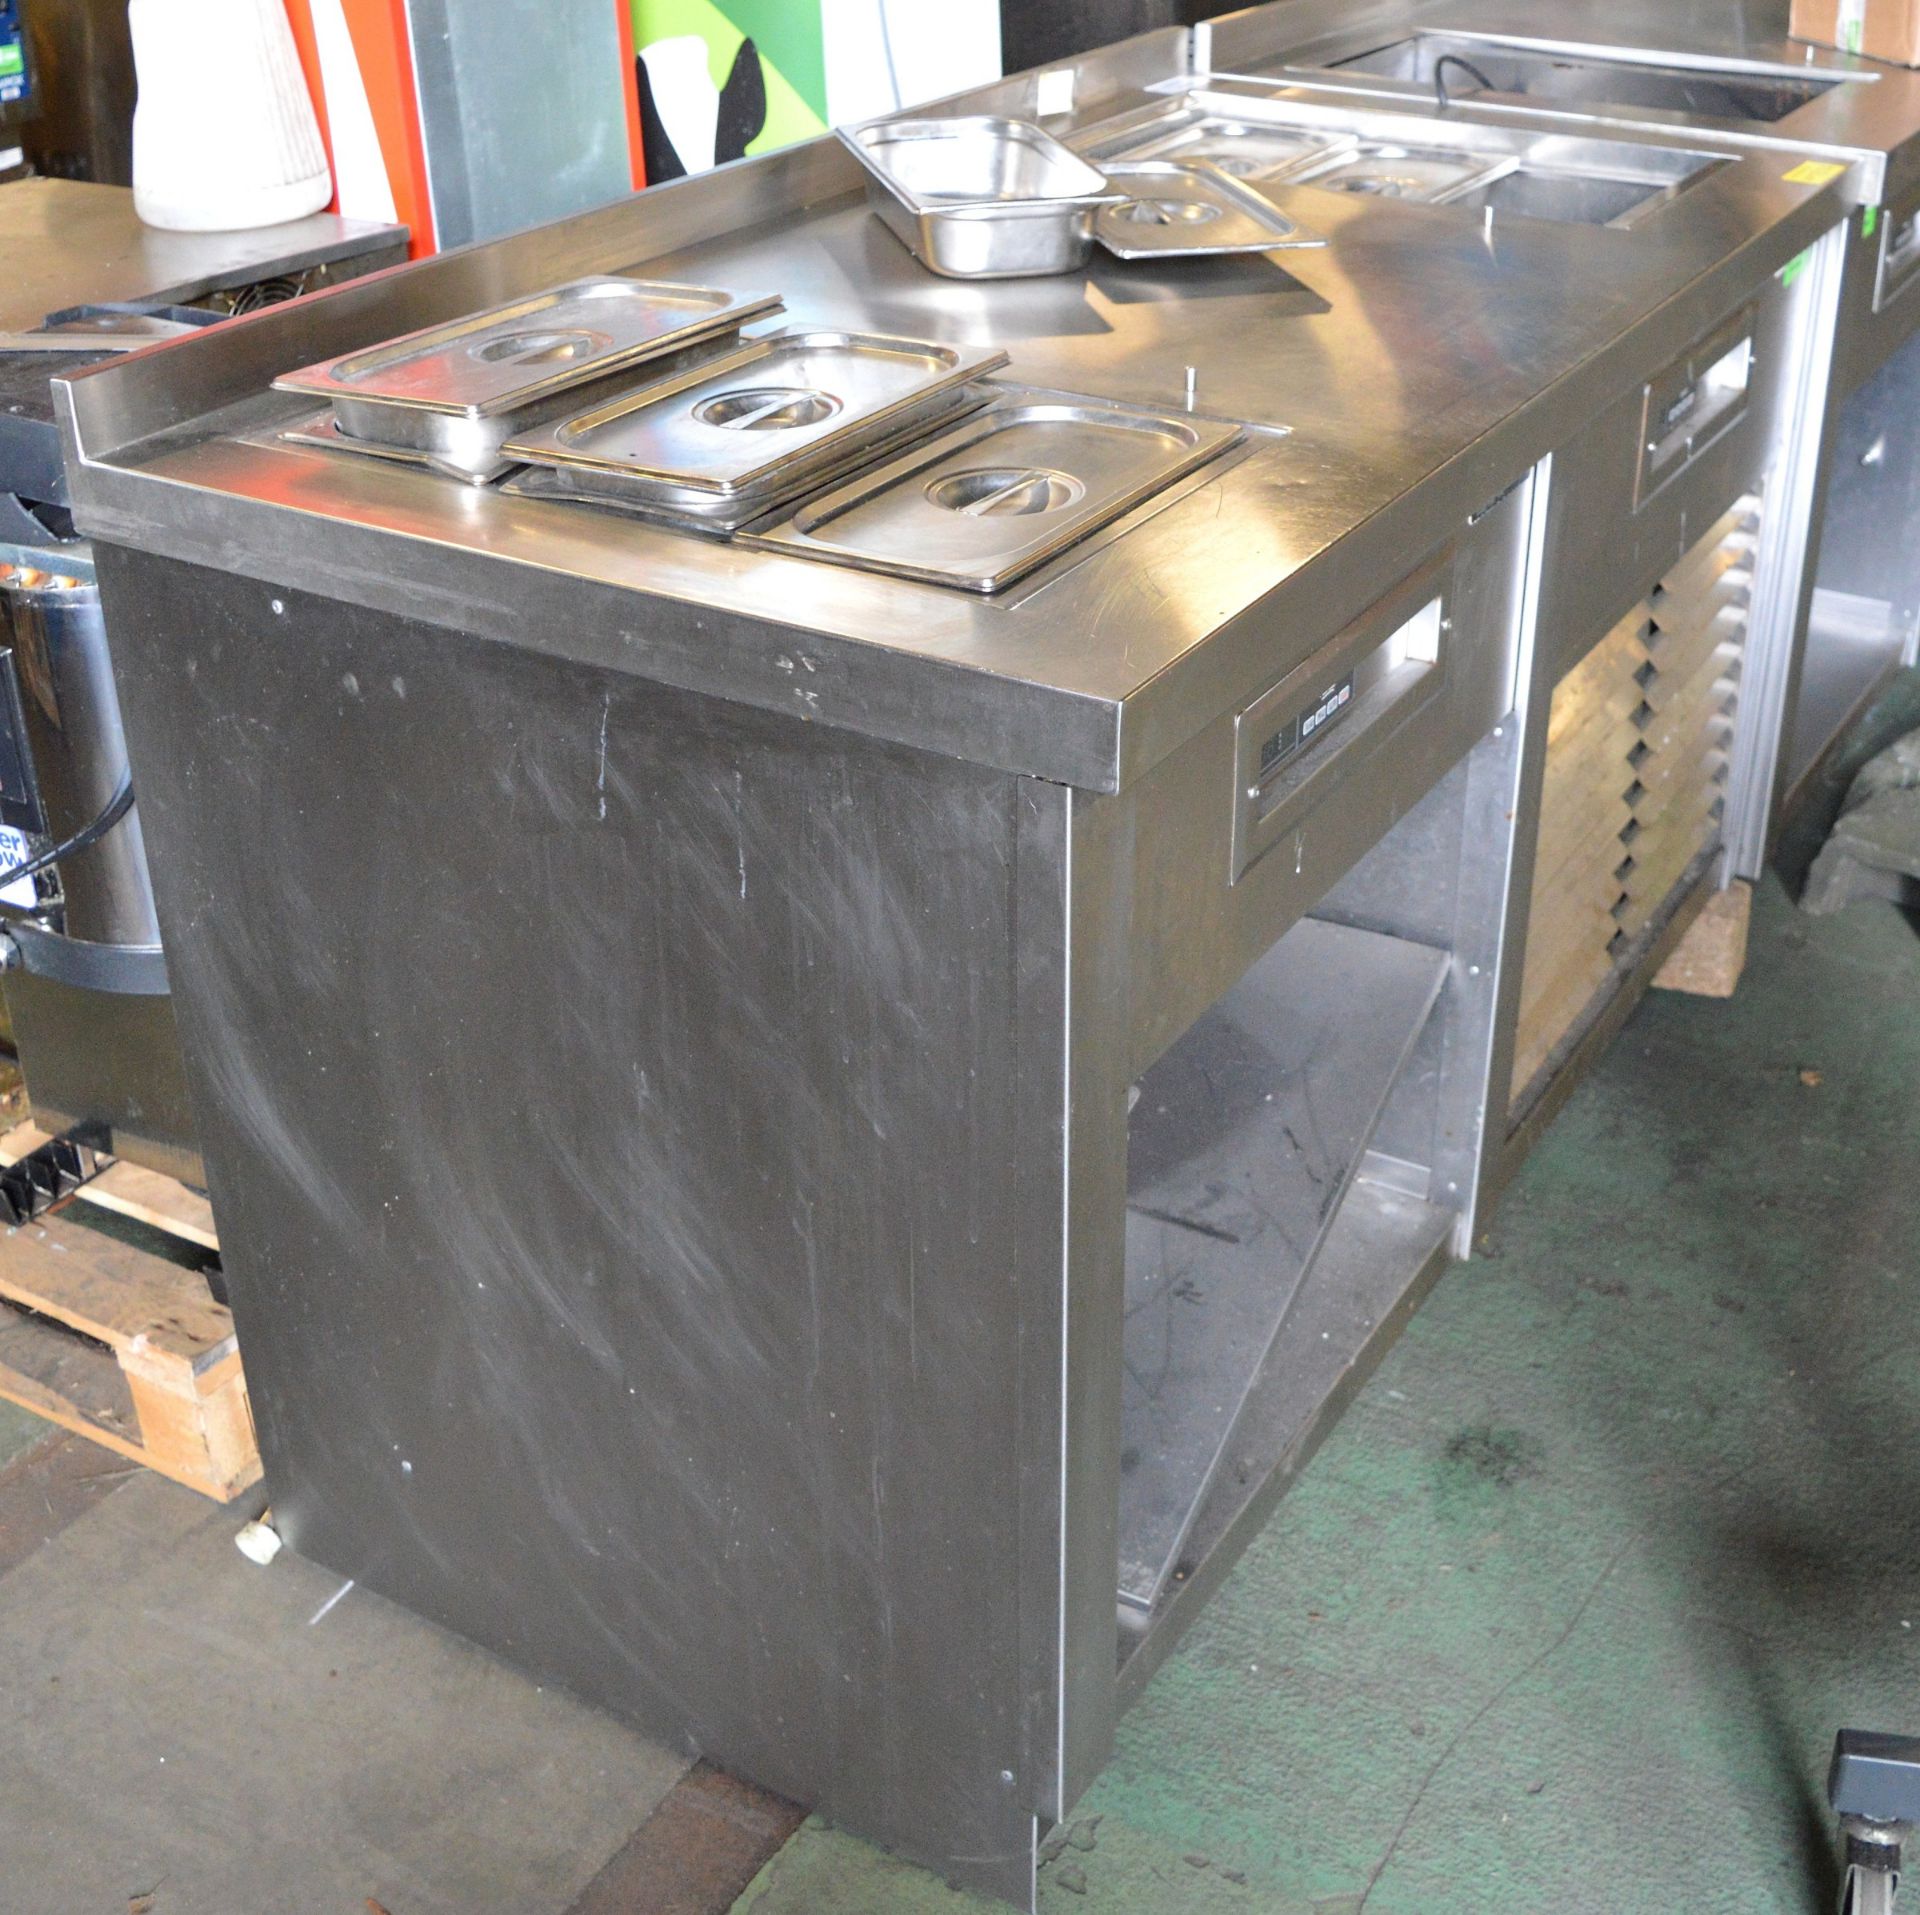 Nuttall Stainless Steel Heated Bain Marie Unit - L1500 x D750 x H960mm - Image 7 of 7